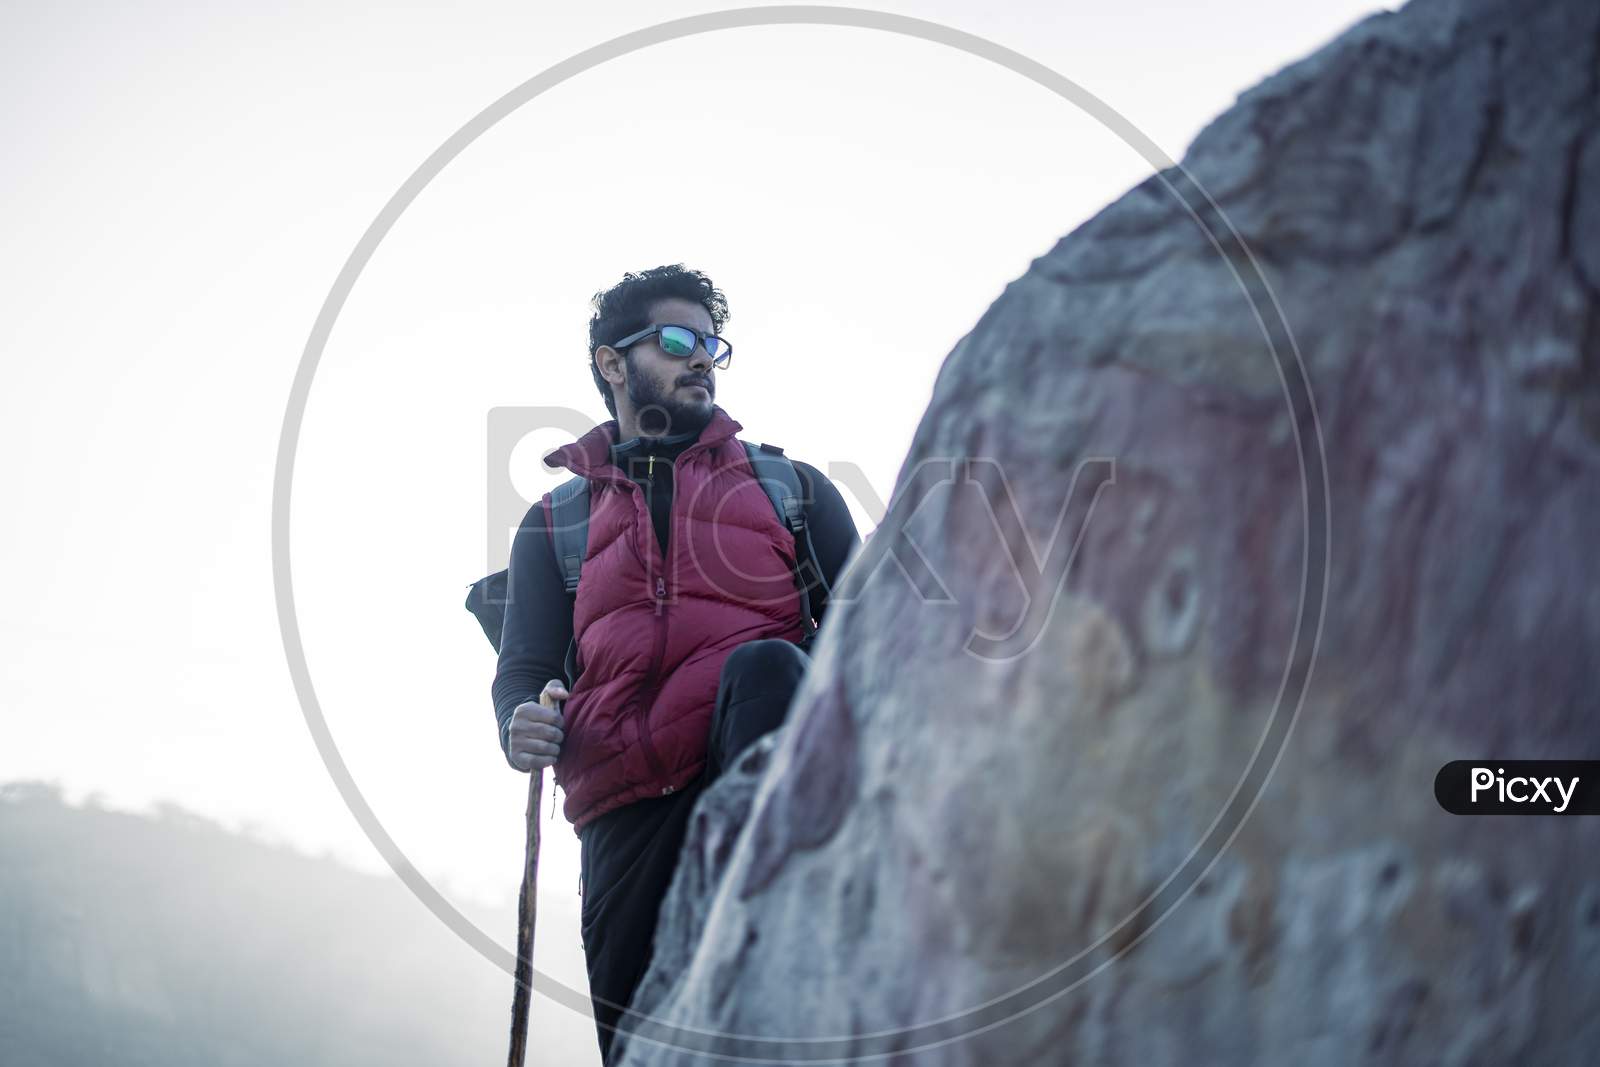 Wide Angled Shot Of A Indian Traveler Hiking Up The Mountain, Shot At A Shallow Depth Of Field From A Rock. Trekking With A Backpack And With Red Snow Jacket.